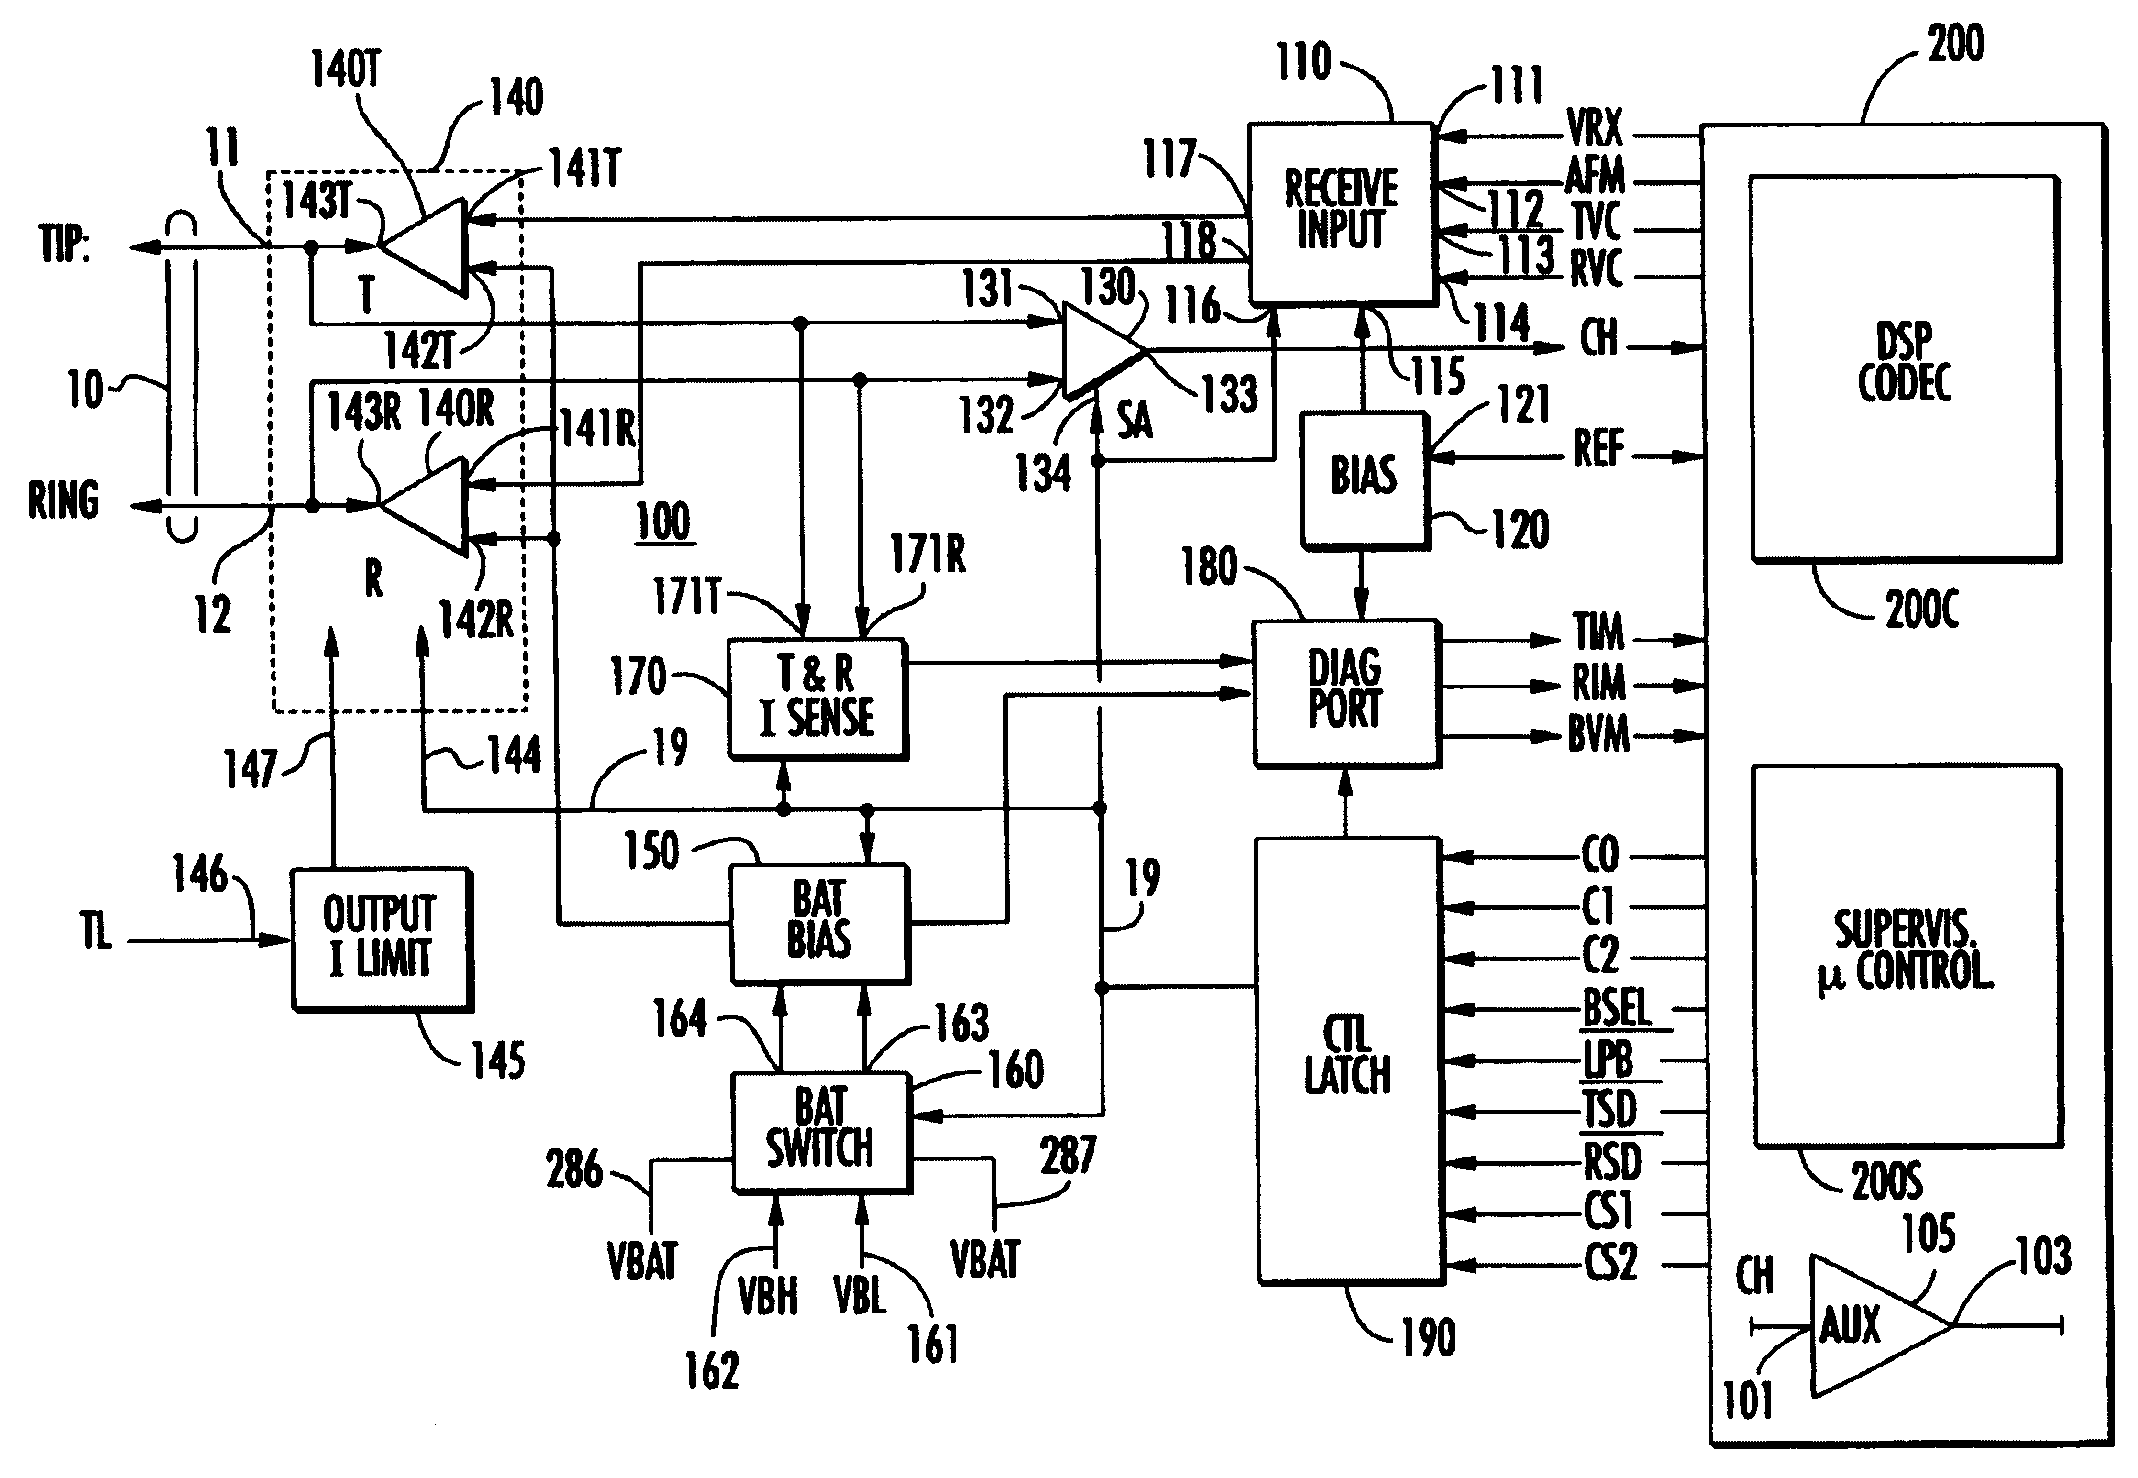 Programmable subscriber line circuit partitioned into high voltage interface and digital control subsections